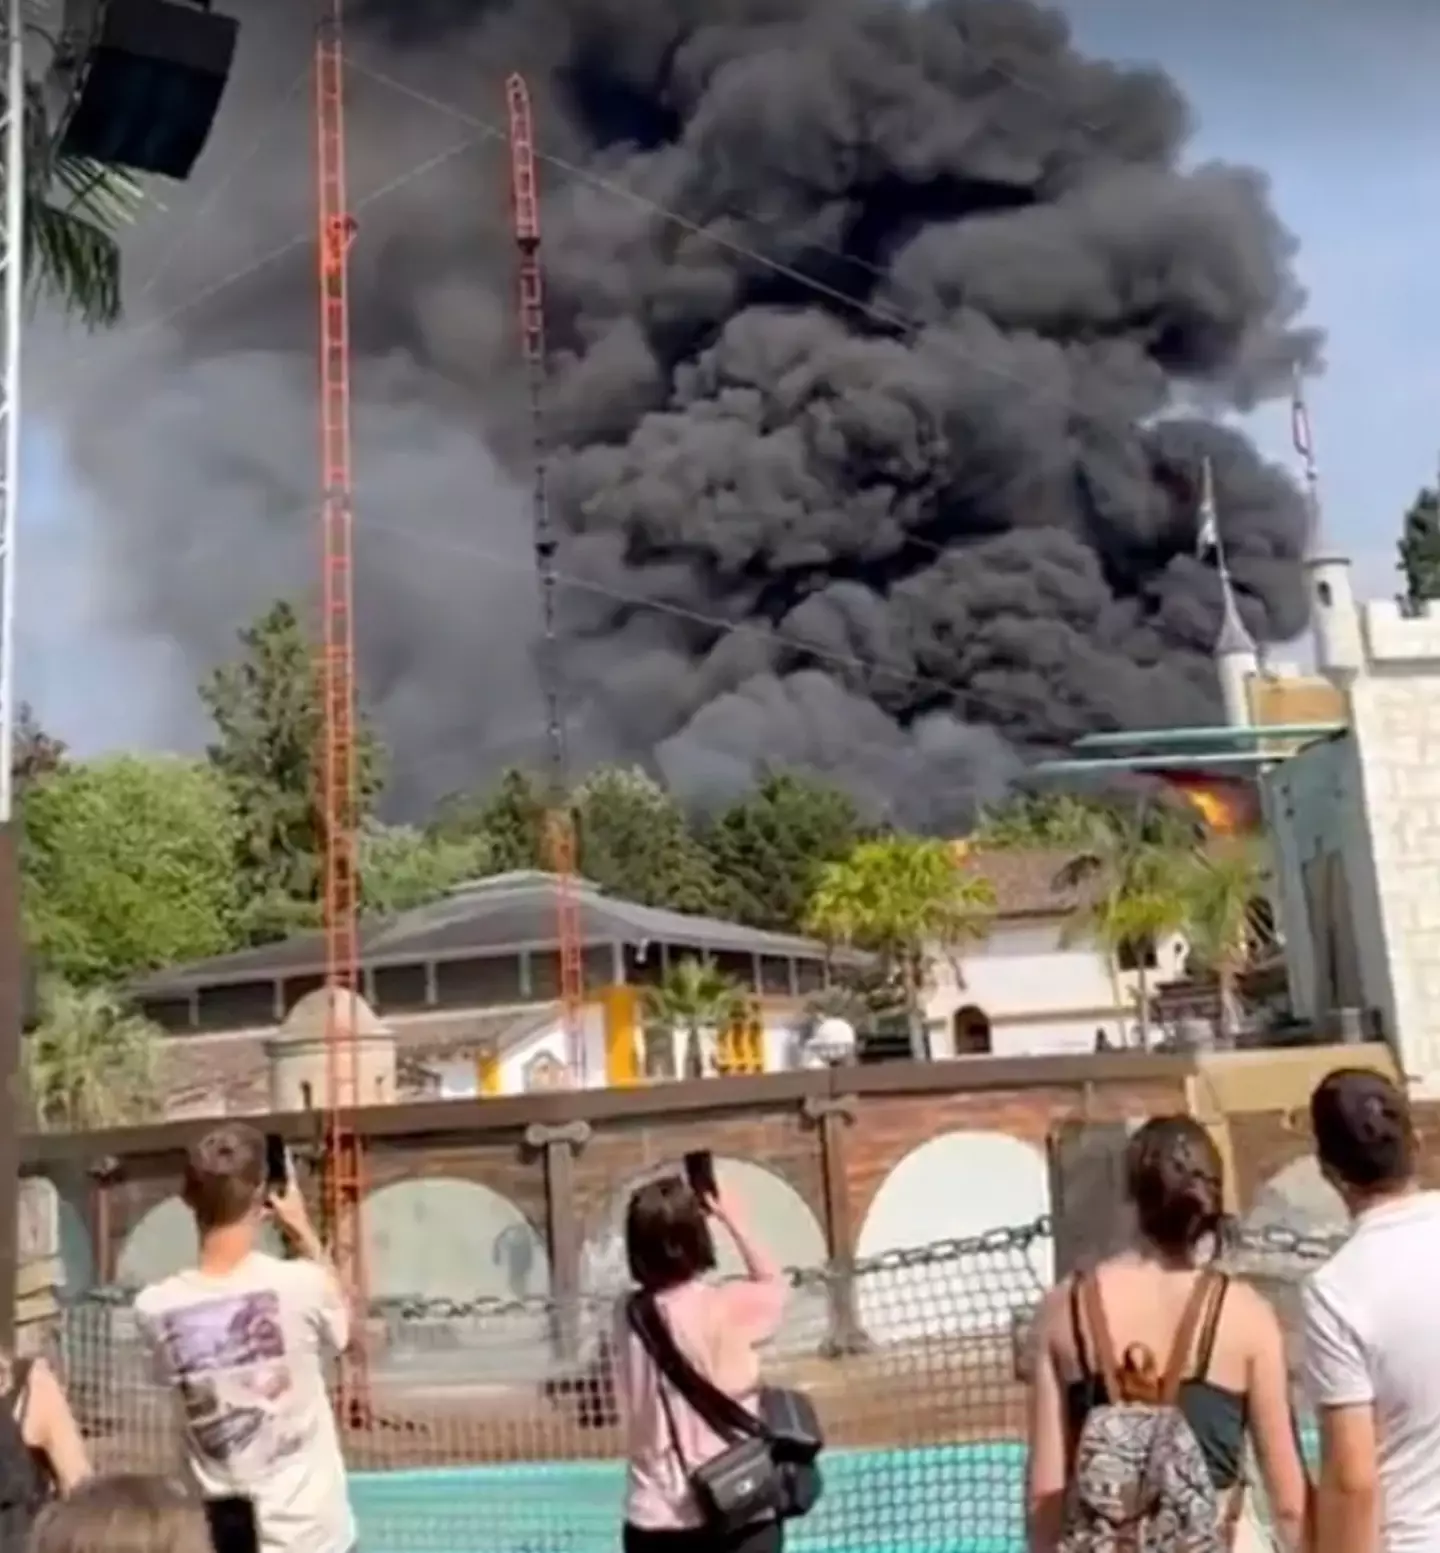 Park goers watch on as a huge fire breaks out at Europa-Park in Germany.